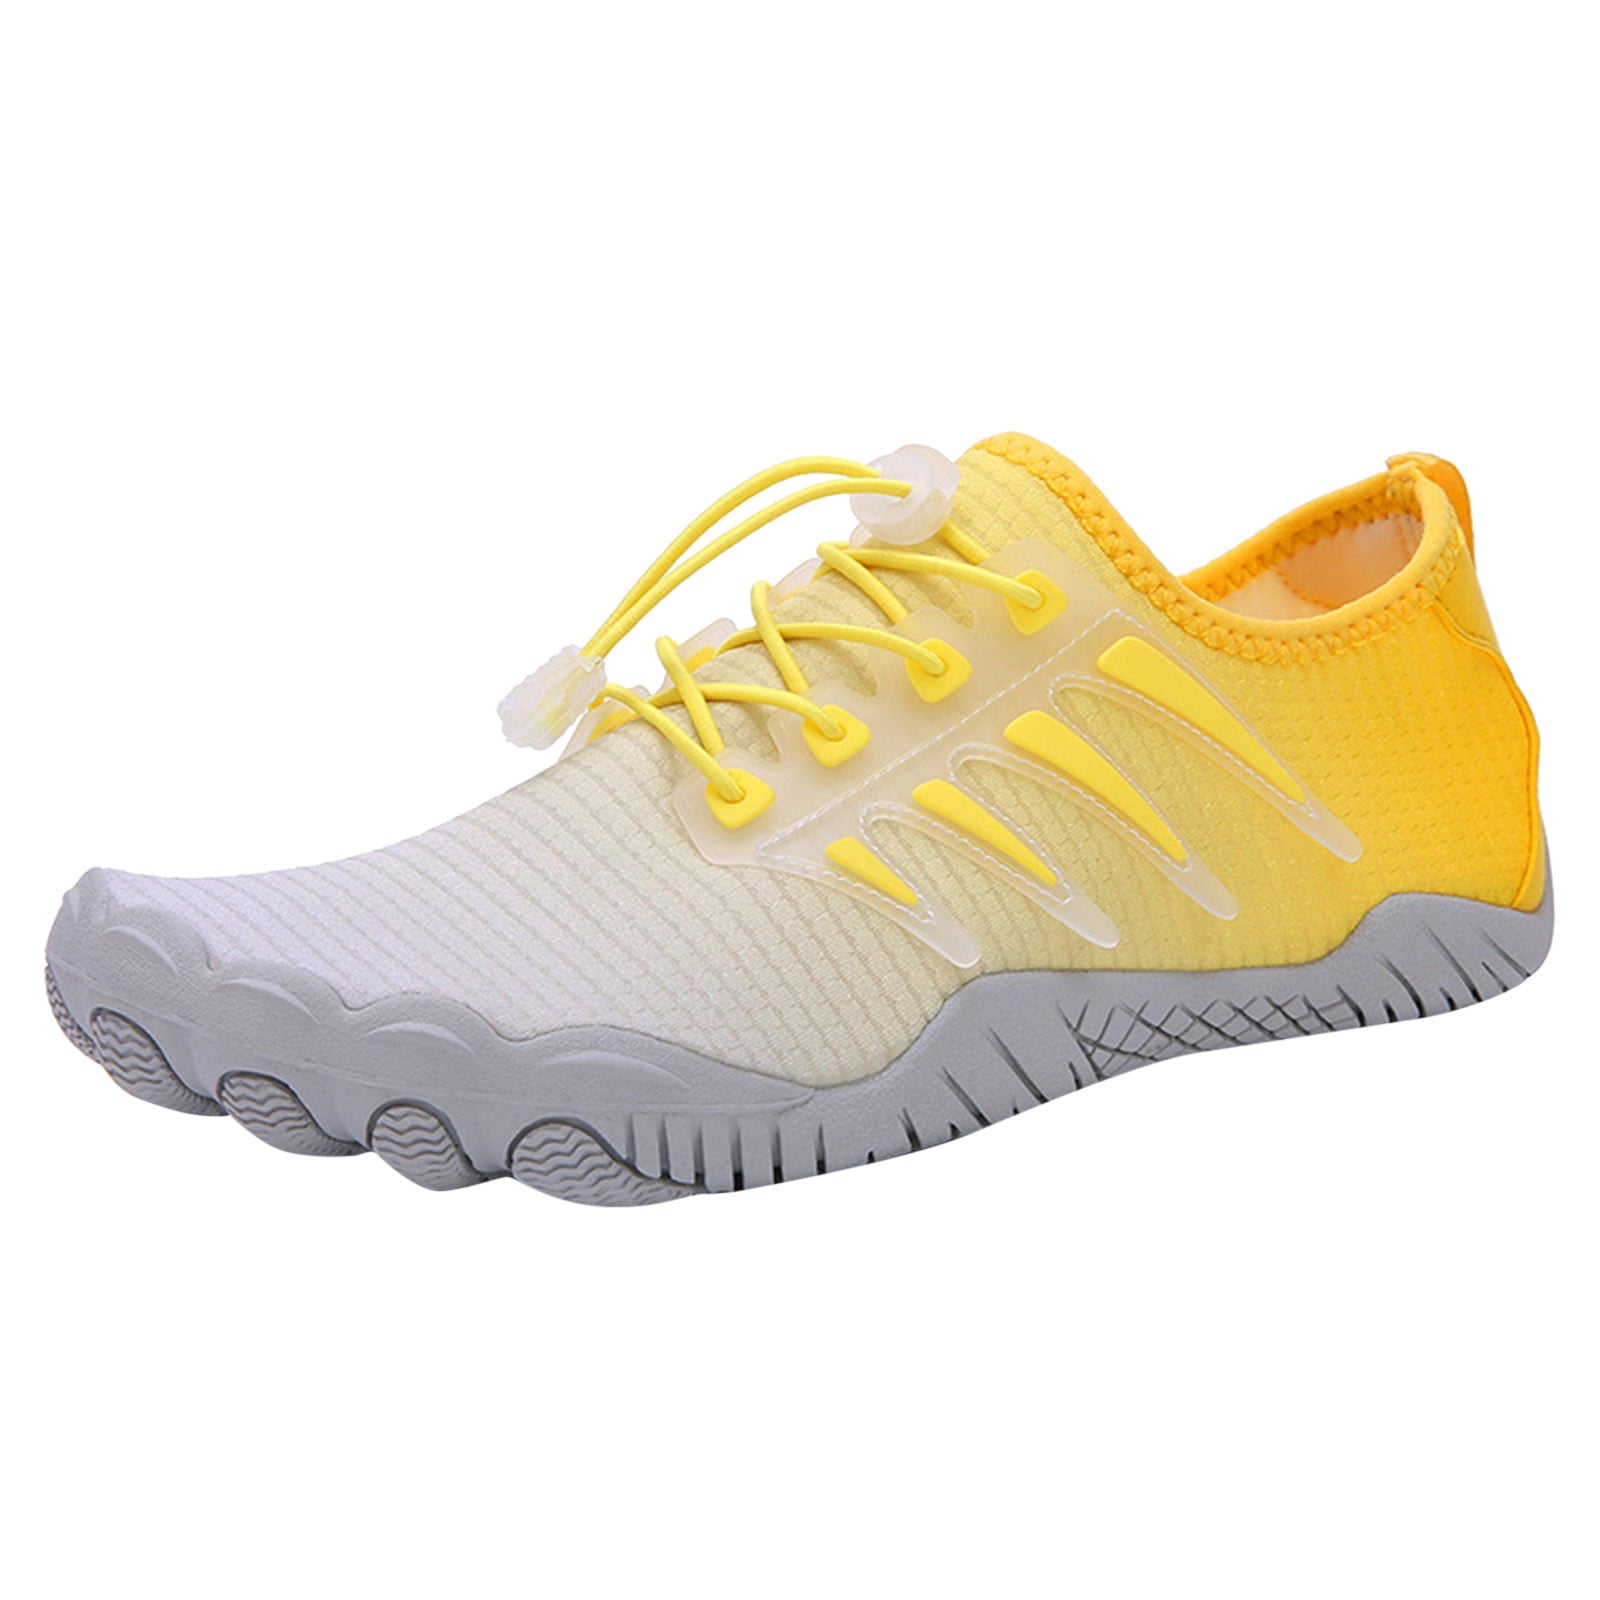 KaLI_store Mens Shoes Sneakers for Men Sport Running Shoes Tennis ...